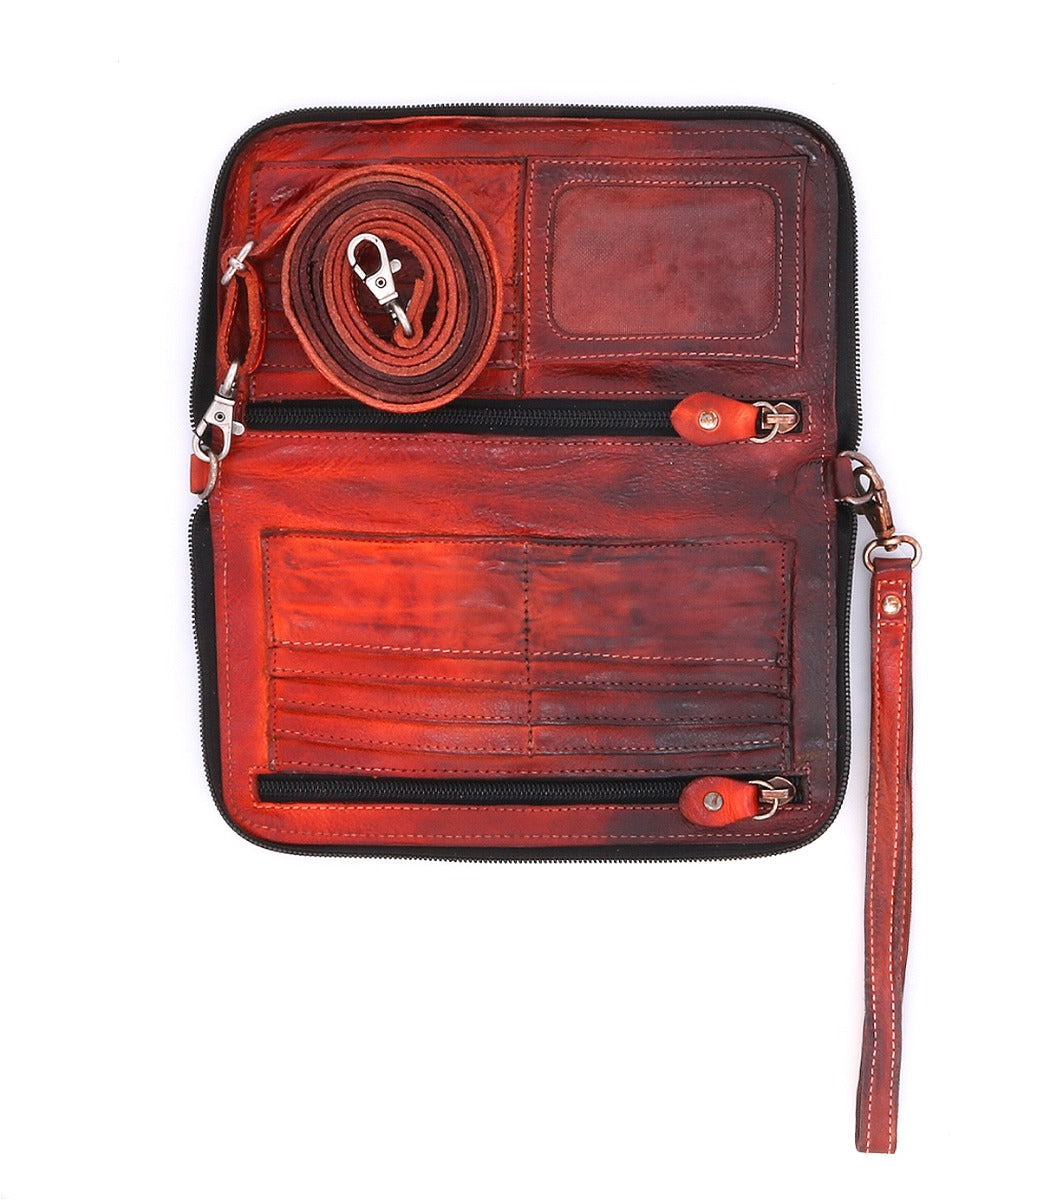 The inside of a Templeton II red leather multi-functional clutch from Bed Stu.